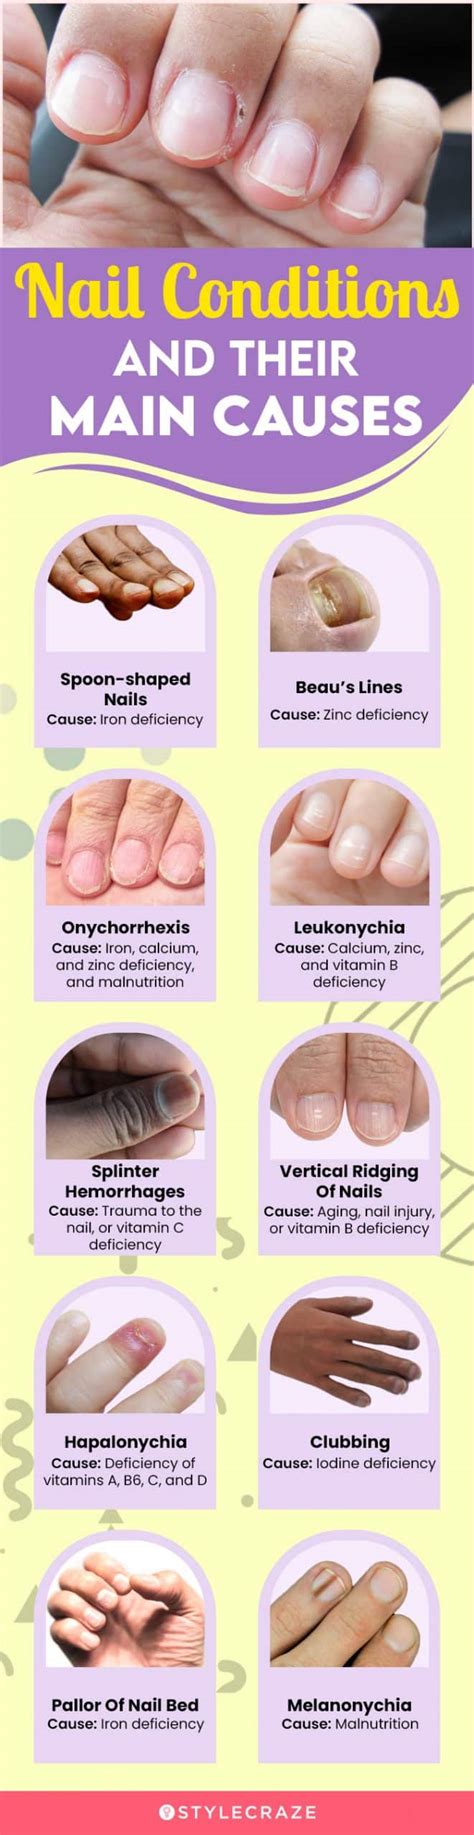 Effects Of Nutrient Deficiency On The Nails What Do They Indicate About Your Health